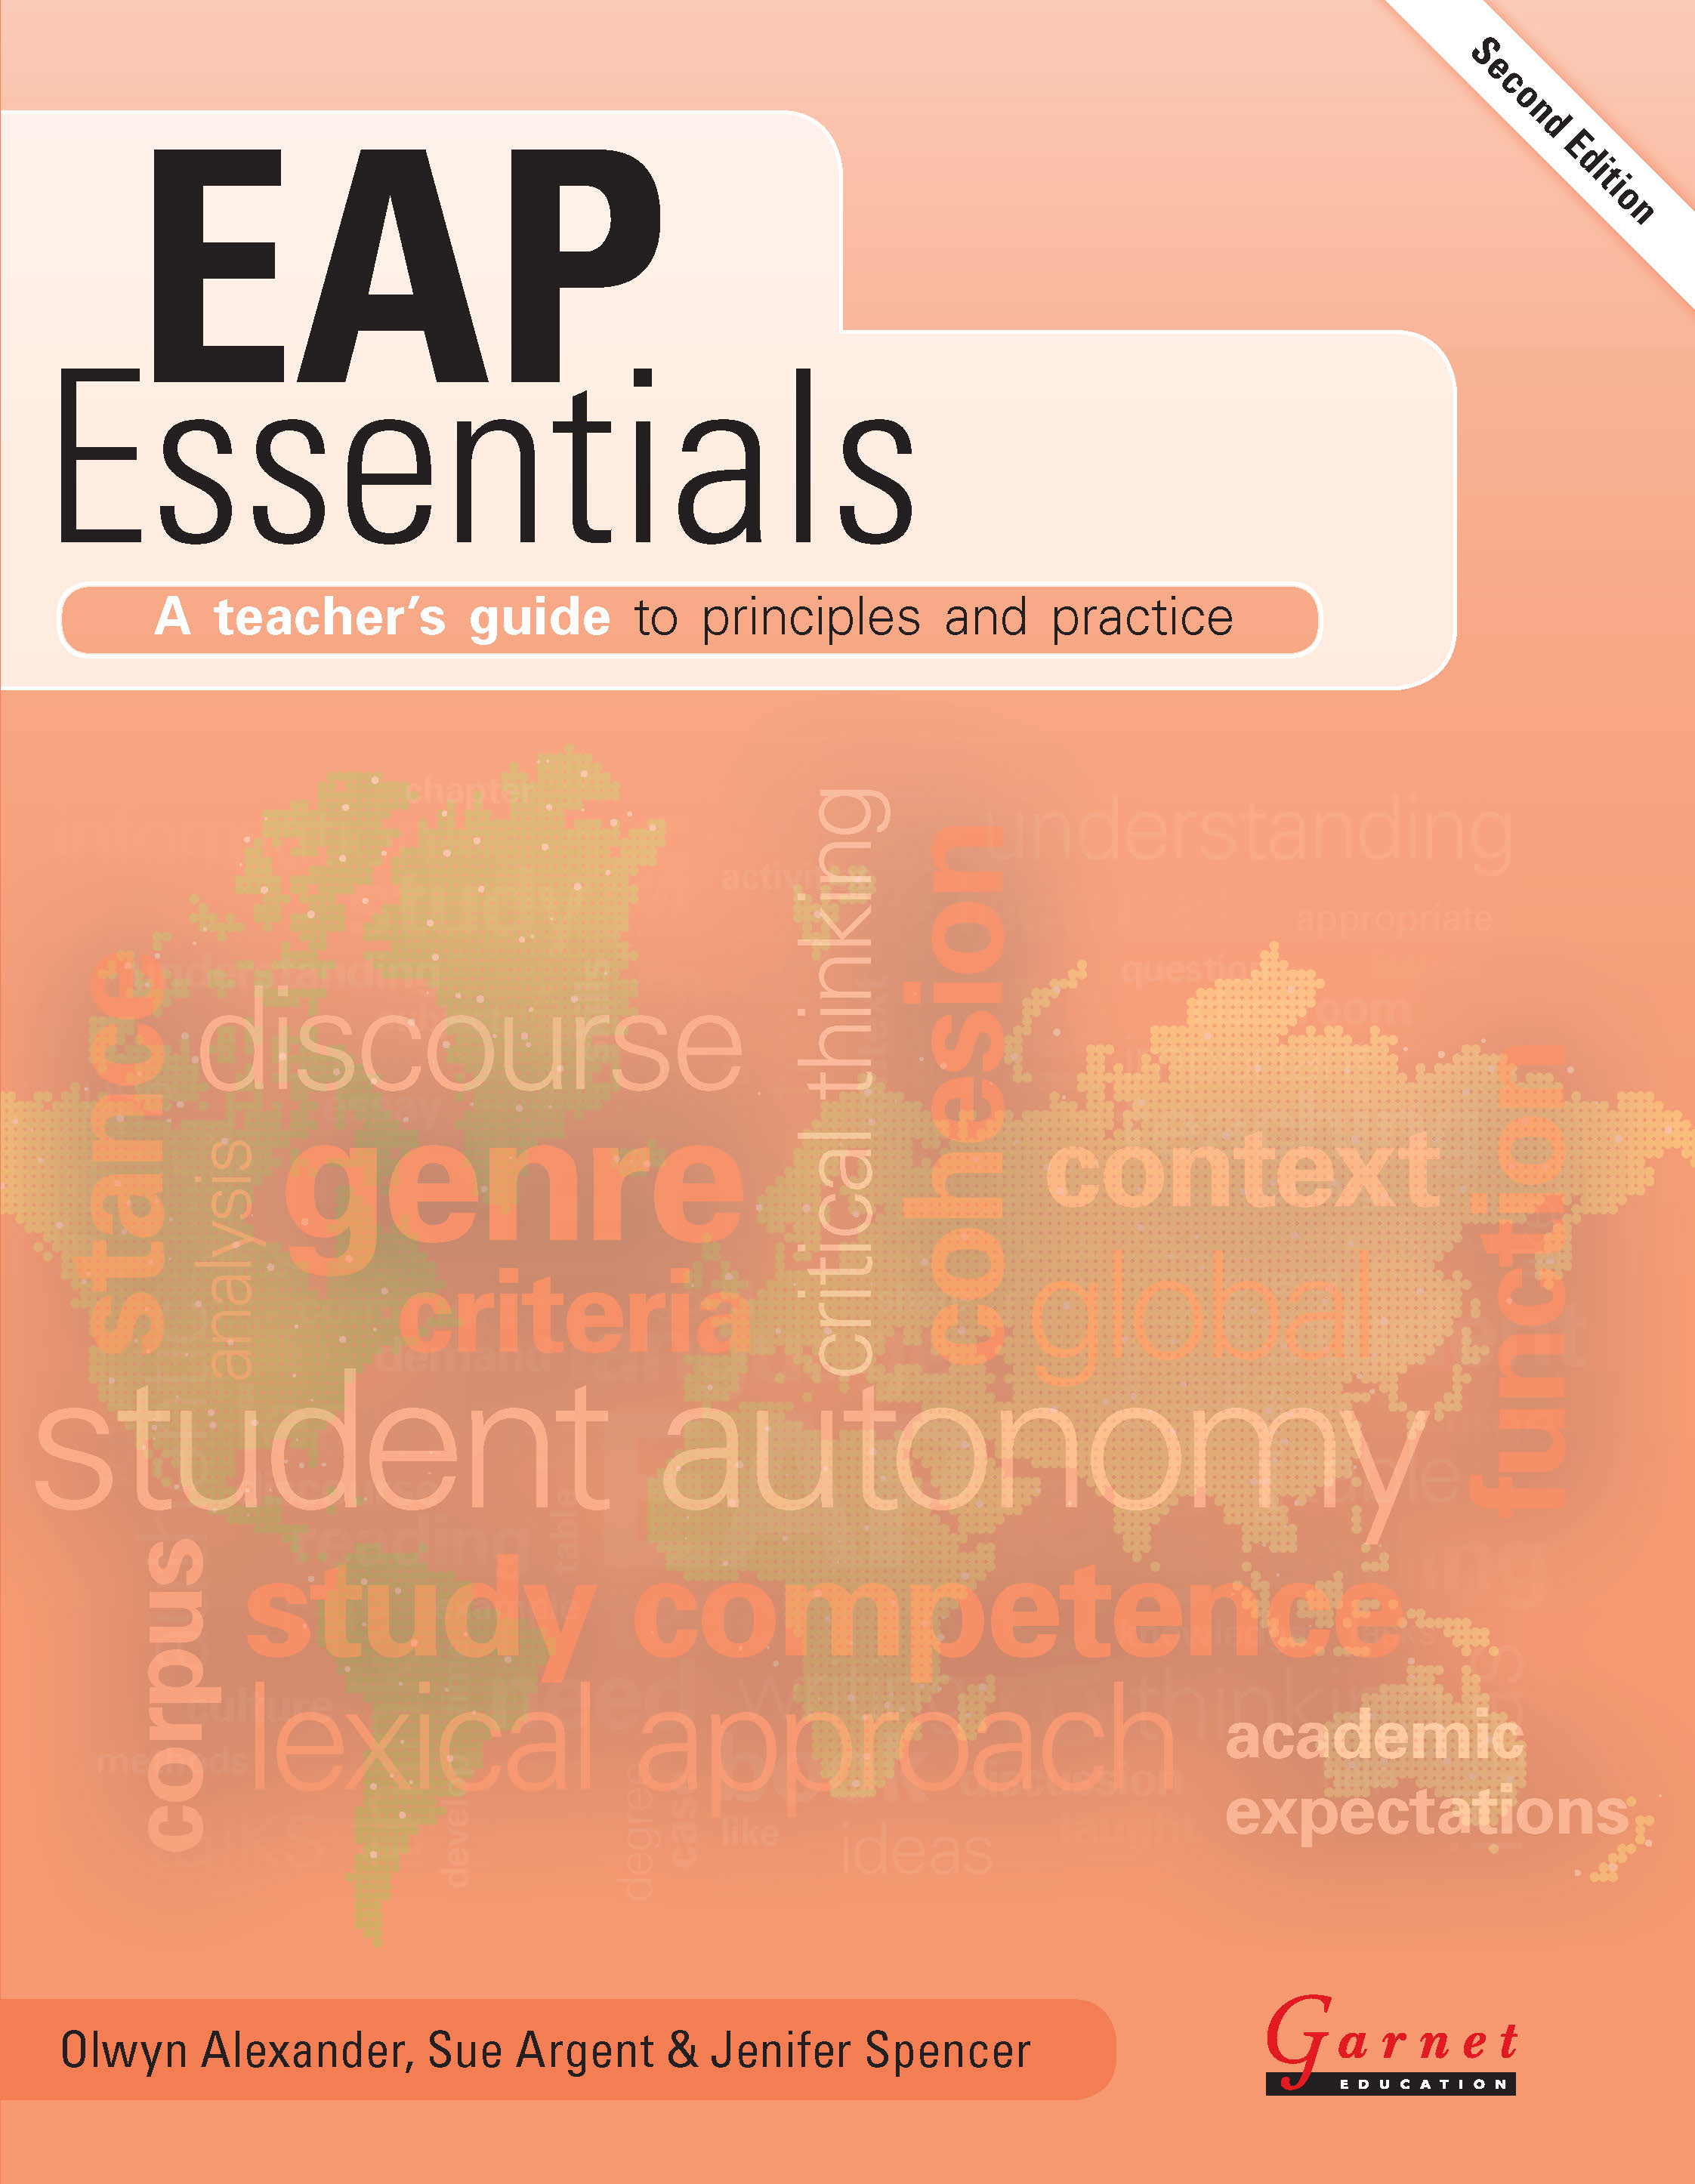 EAP　Garnet　and　teacher's　practice　Essentials:　principles　to　A　guide　Education